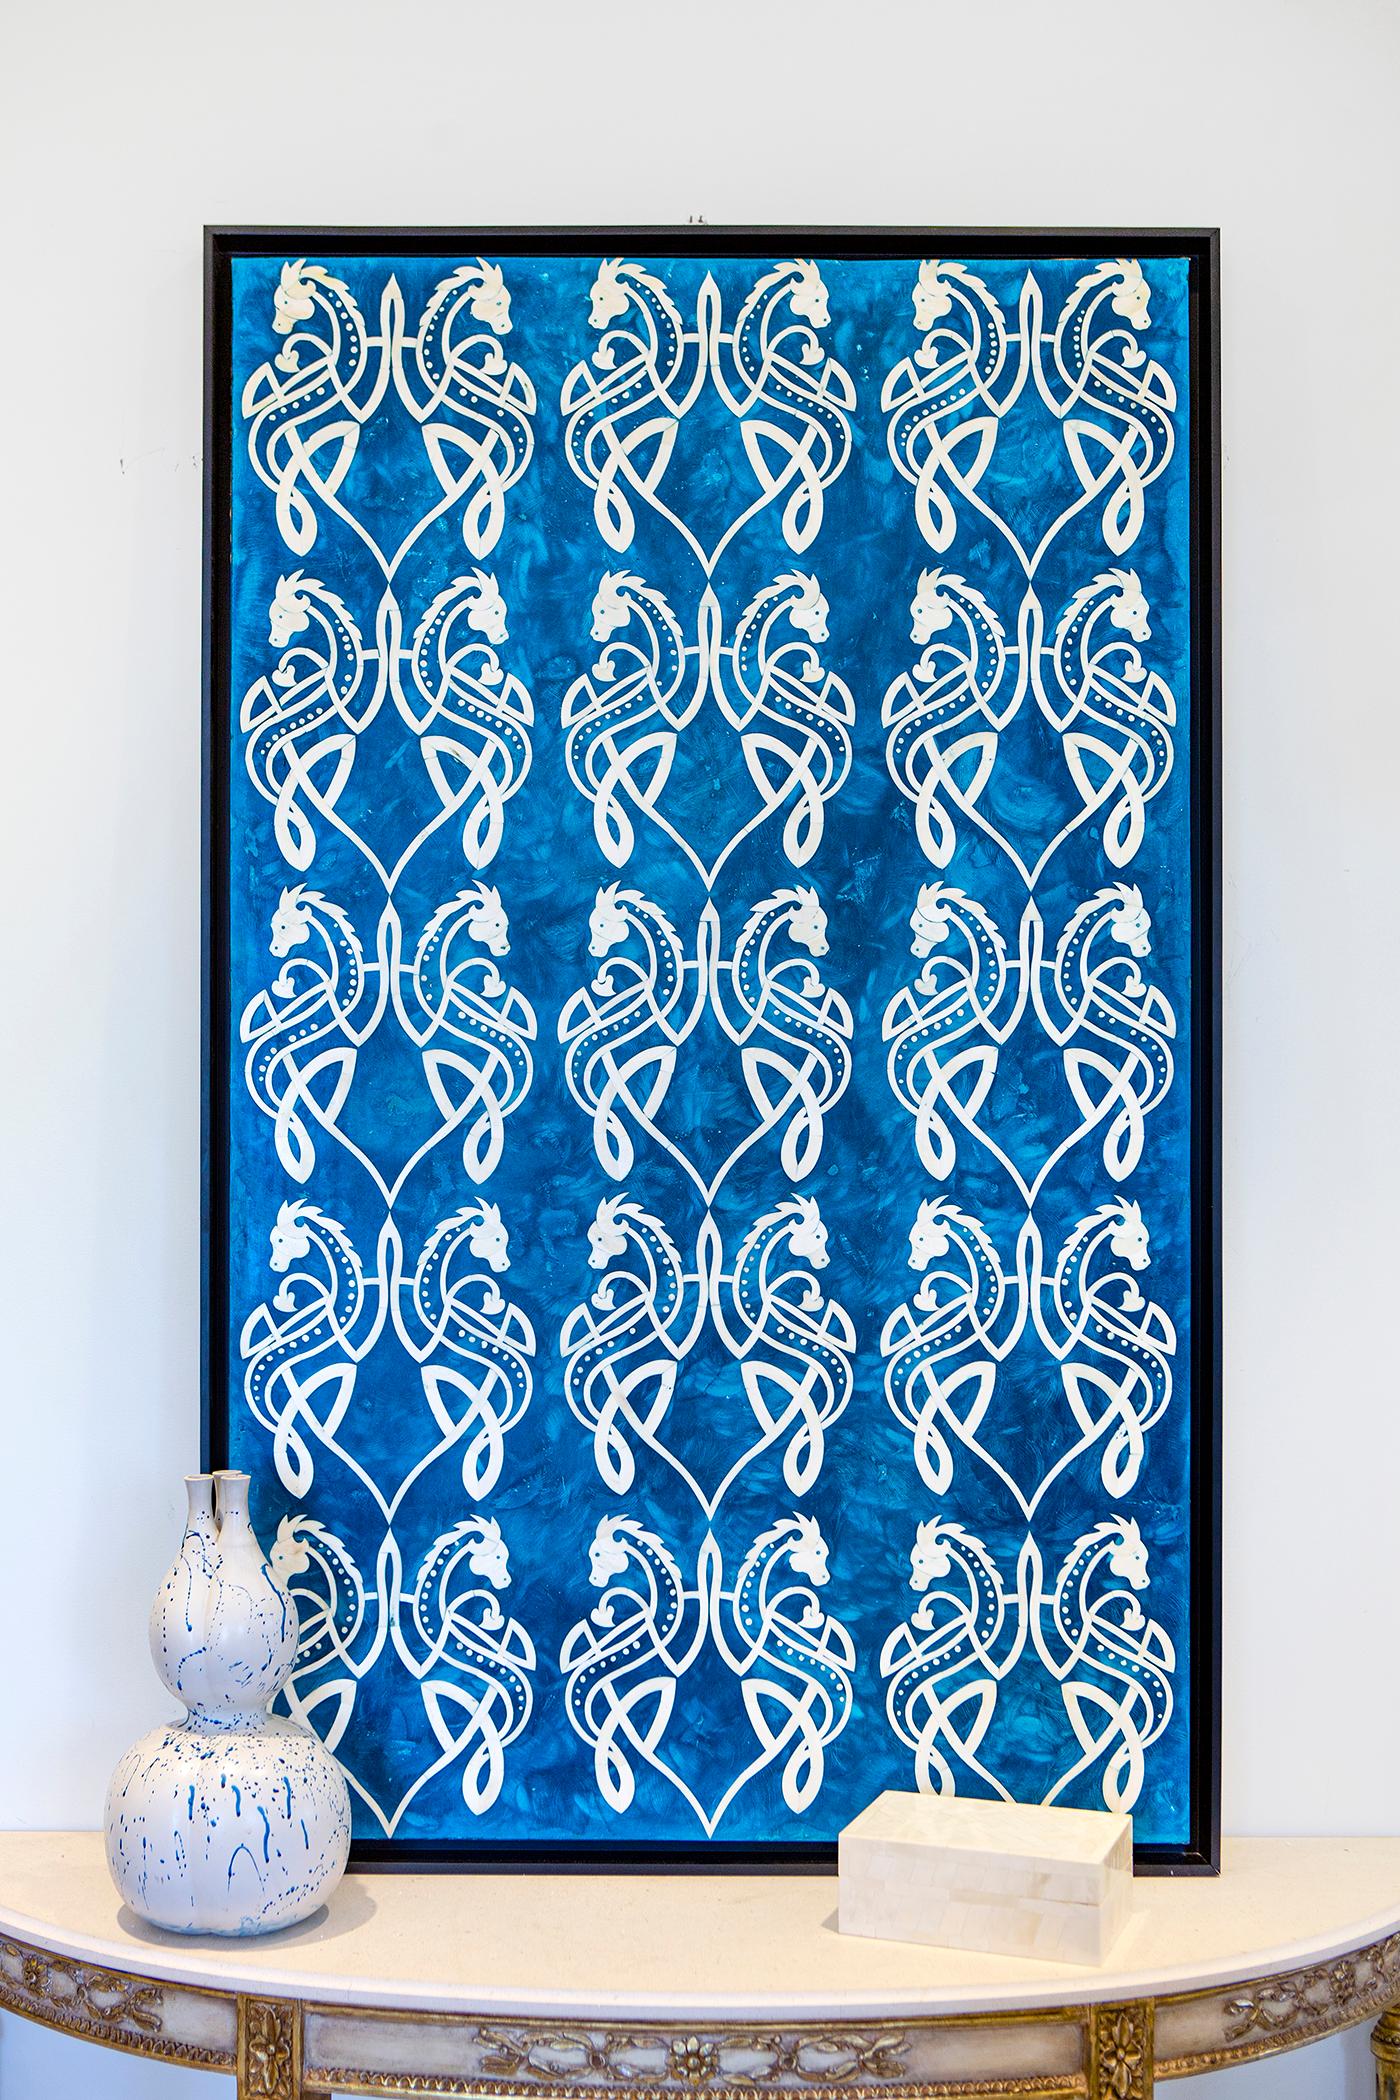 French Provincial Bone Inlaid Wall Art in Blue Resin with Celtic Dragon Pattern- Instock For Sale